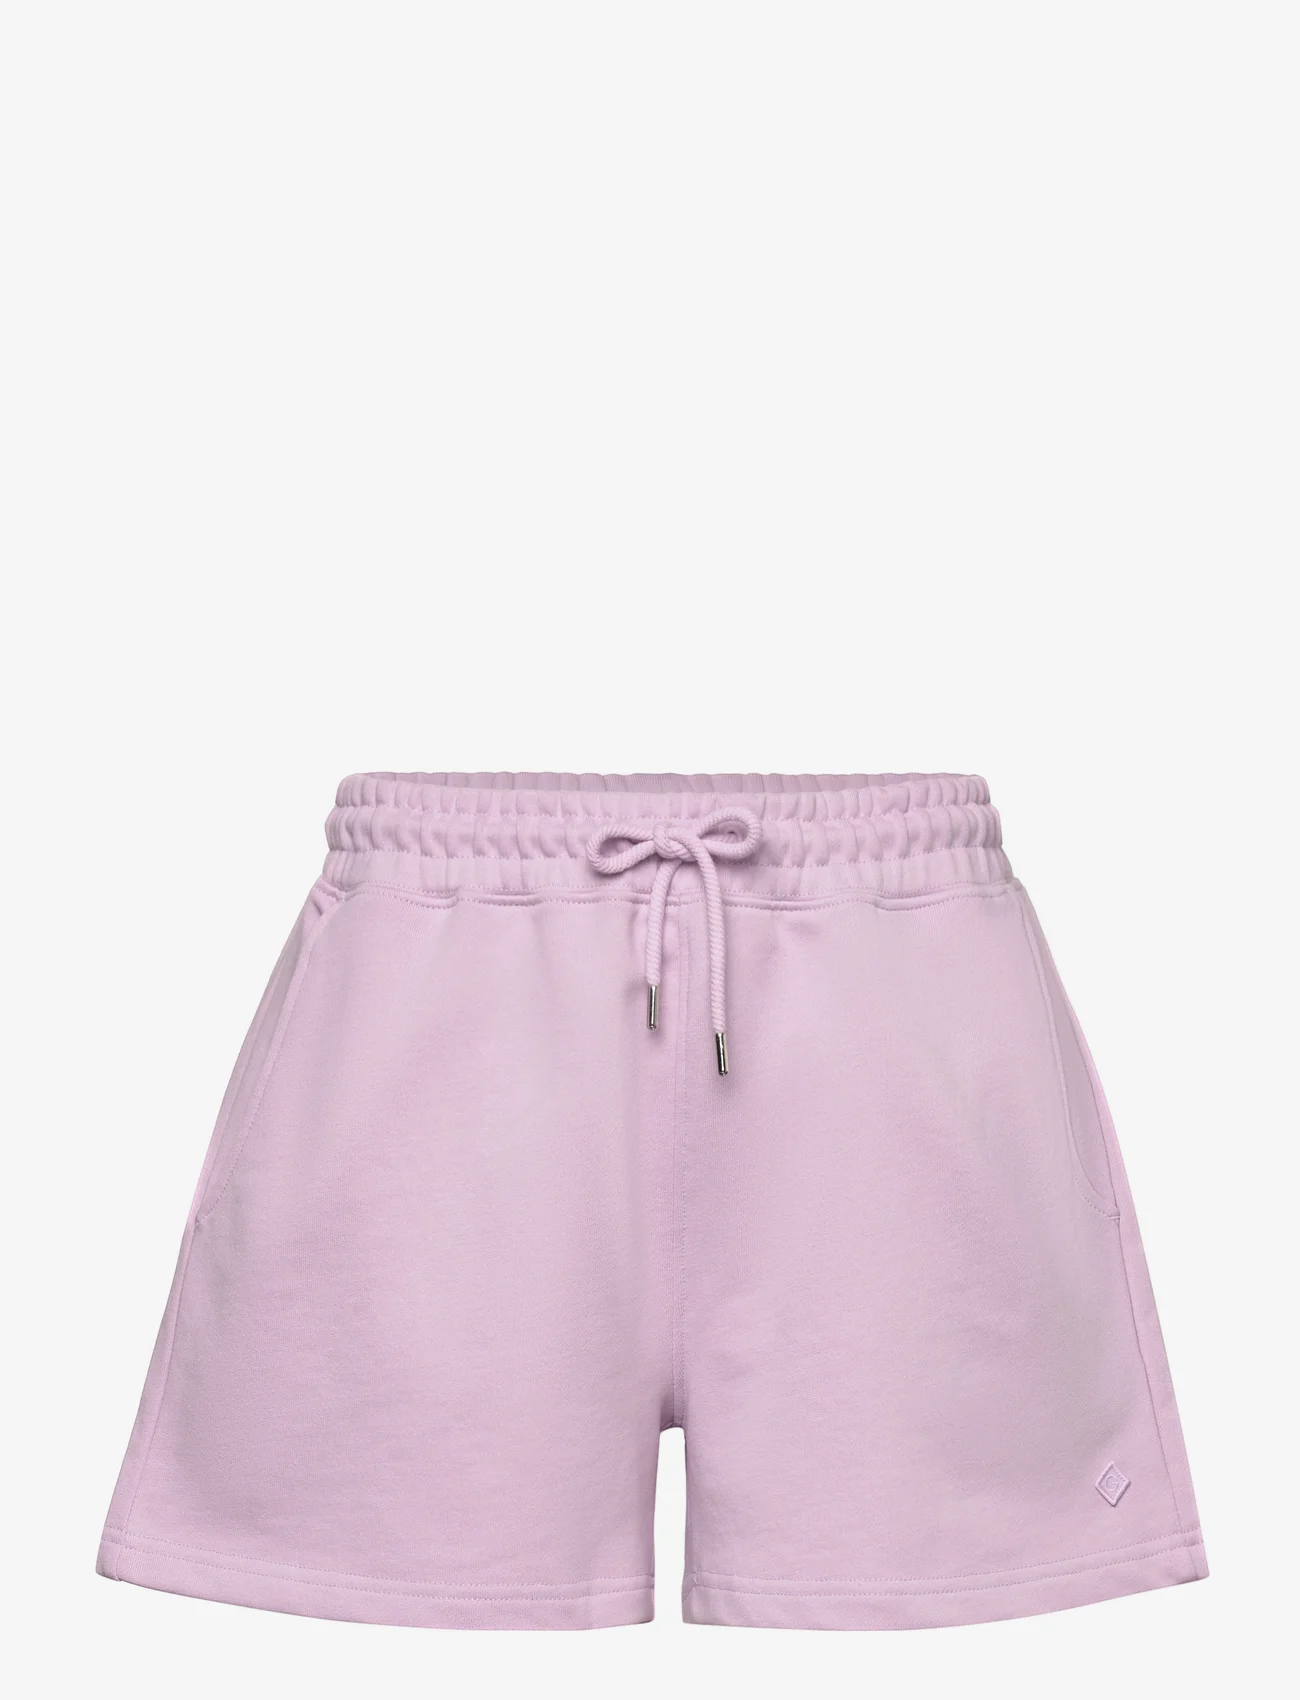 GANT - REL ICON G ESSENTIAL SHORTS - collegeshortsit - soothing lilac - 0